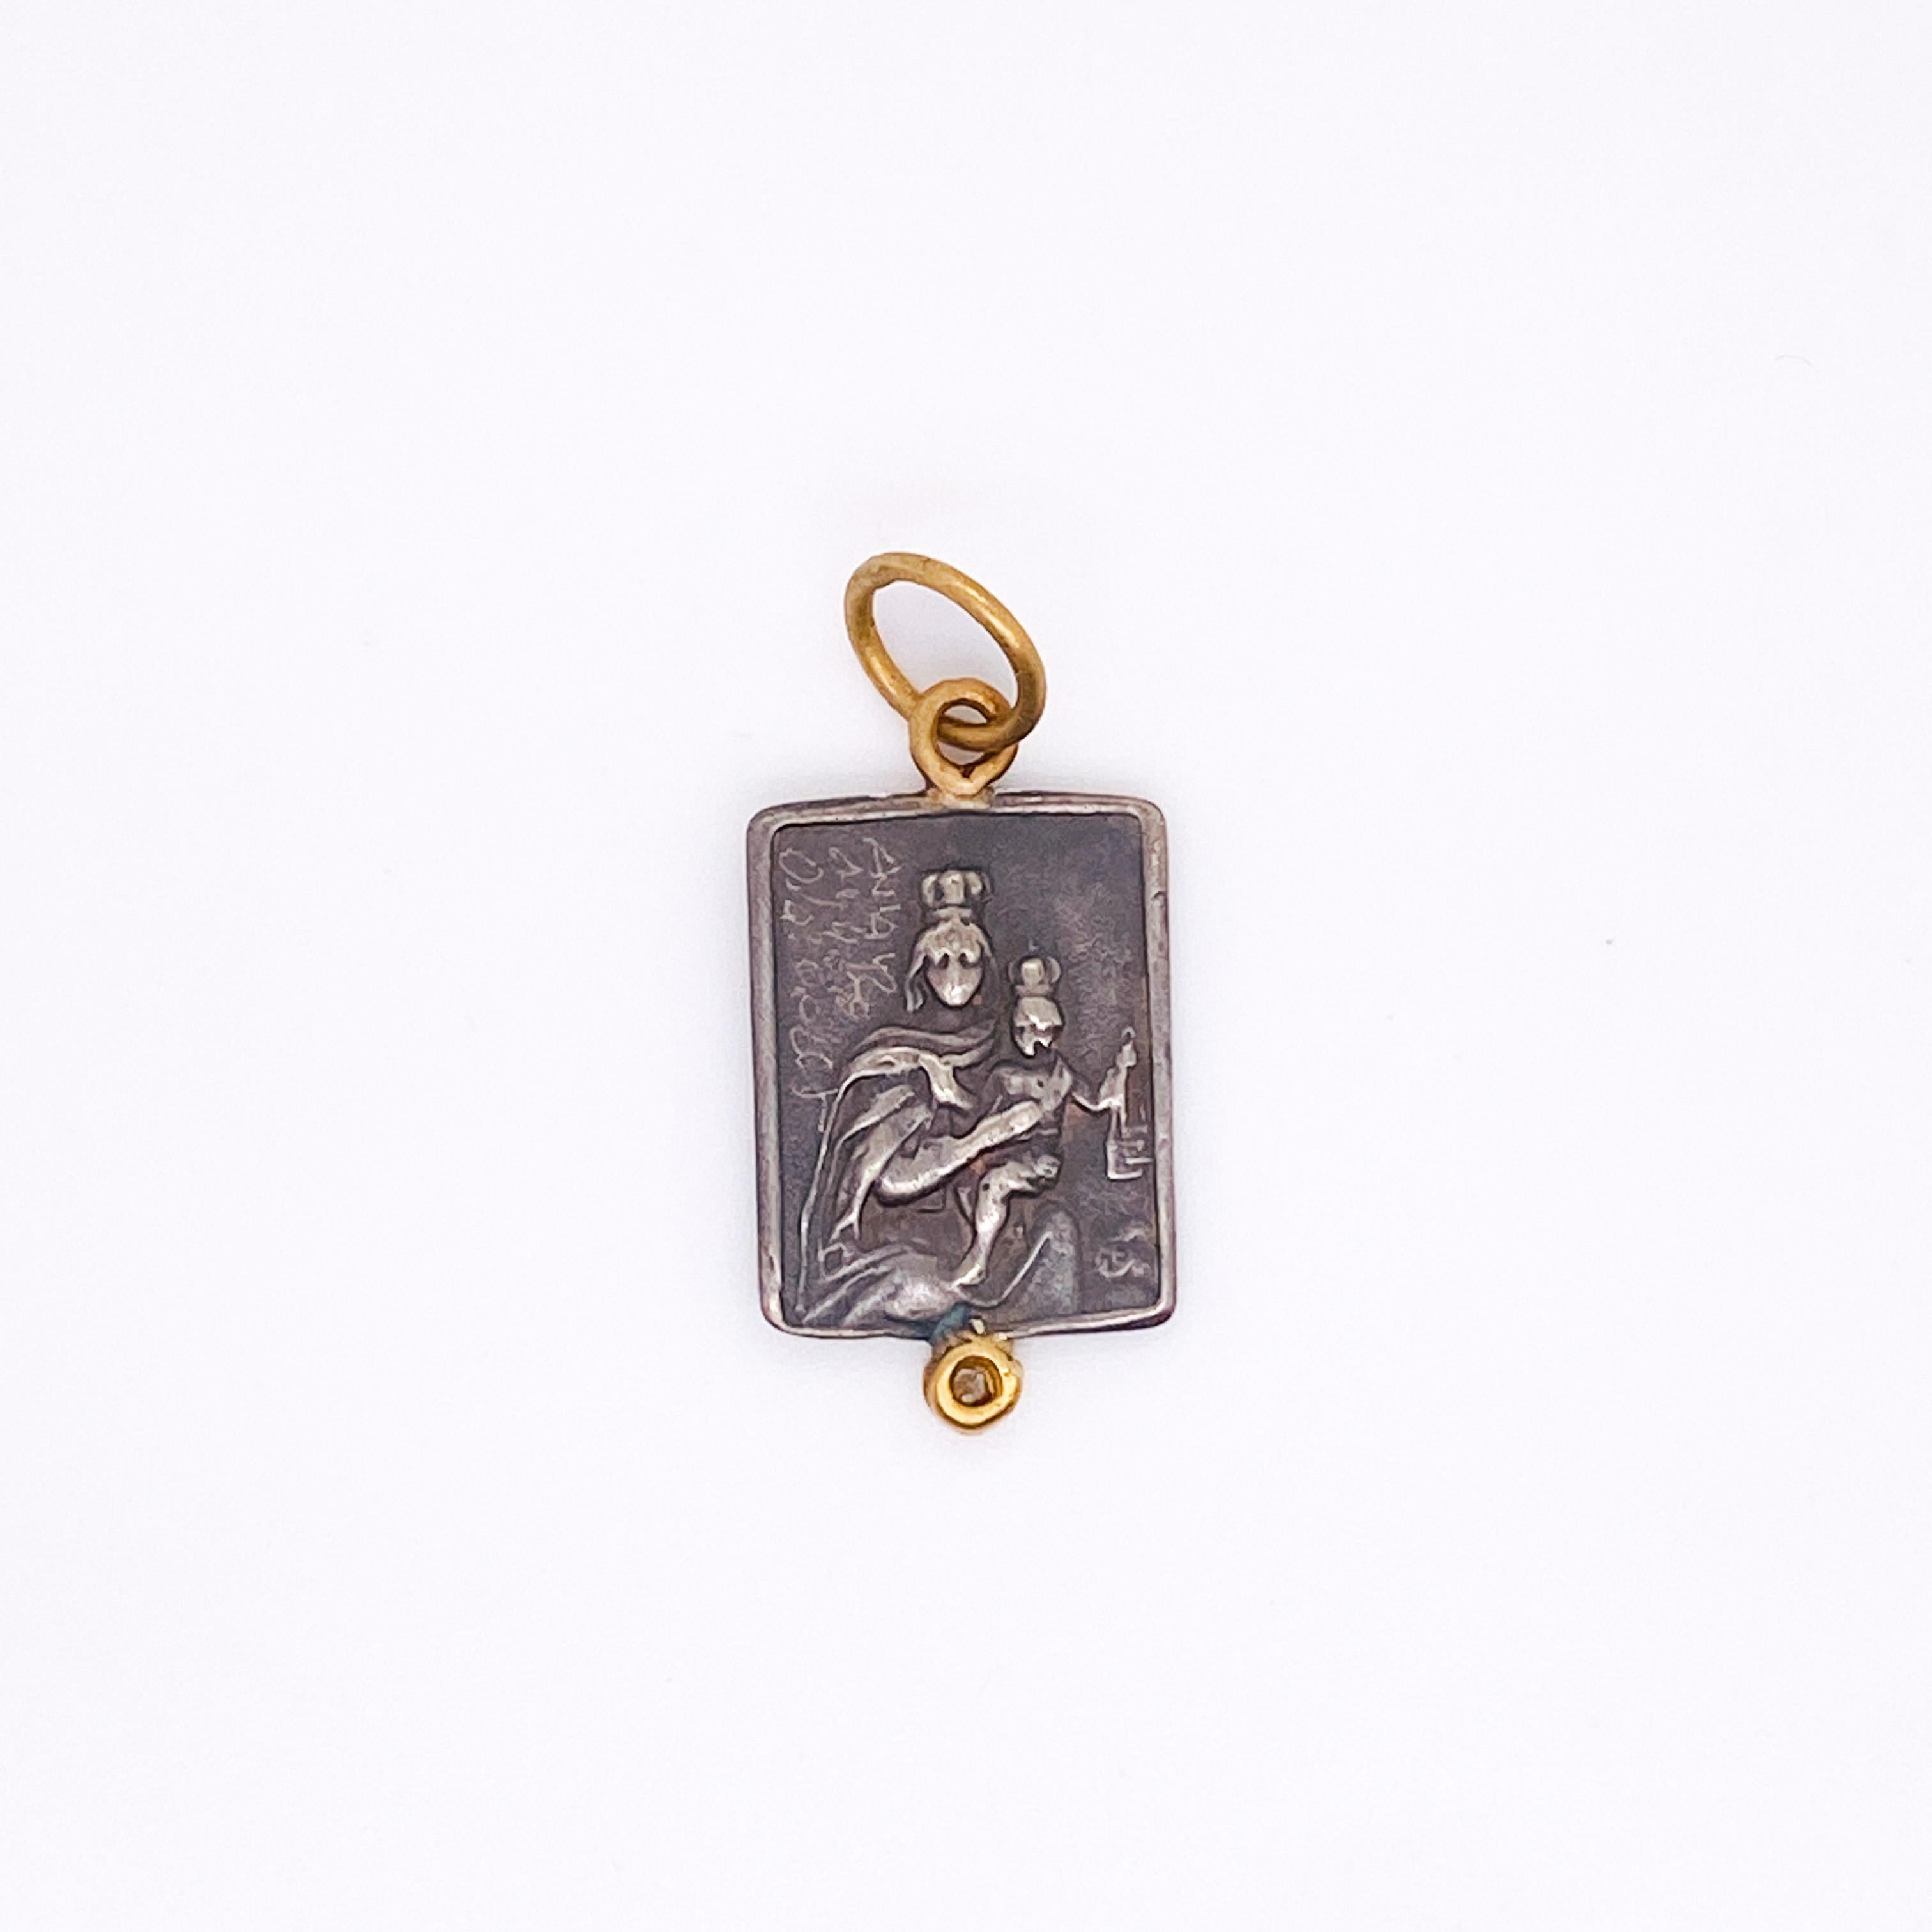 The sacred heart of Jesus and Mary is perfect to show your faith. The Christian pendant has Jesus on one side and Mary on the other. He rectangle shape is very unique and there is a 24 karat double jump ring to go on a chain or a charm bracelet.